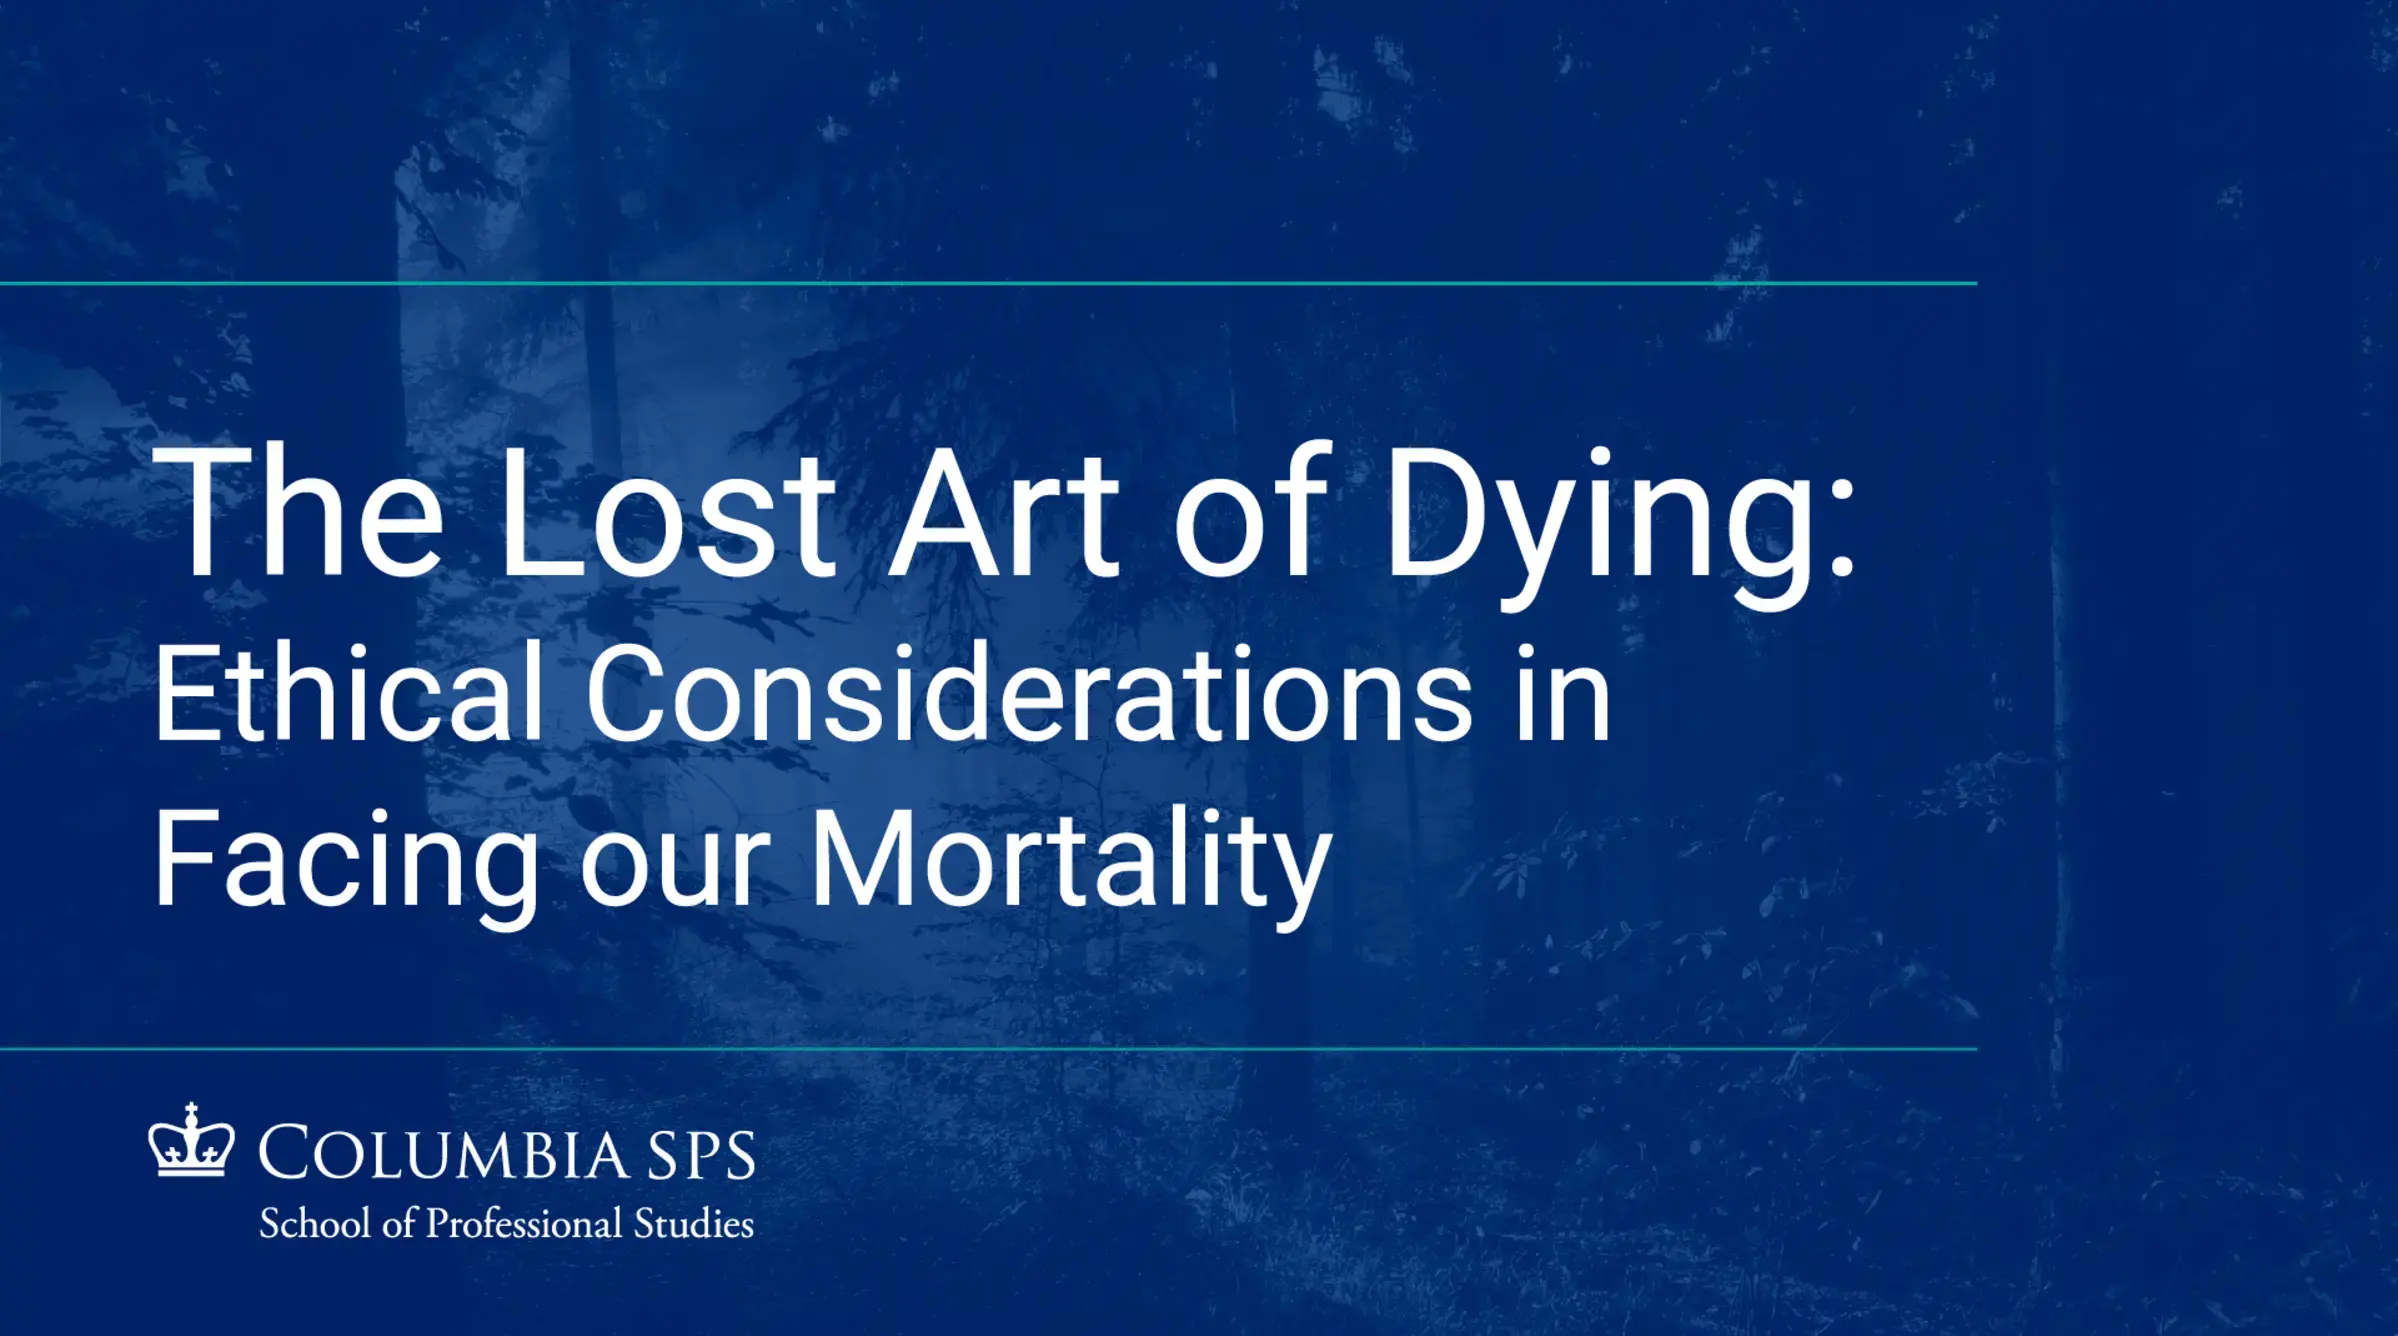 A cover image for the recording of the Bioethics event, "The Lost Art of Dying: Ethical Considerations in Facing our Mortality."